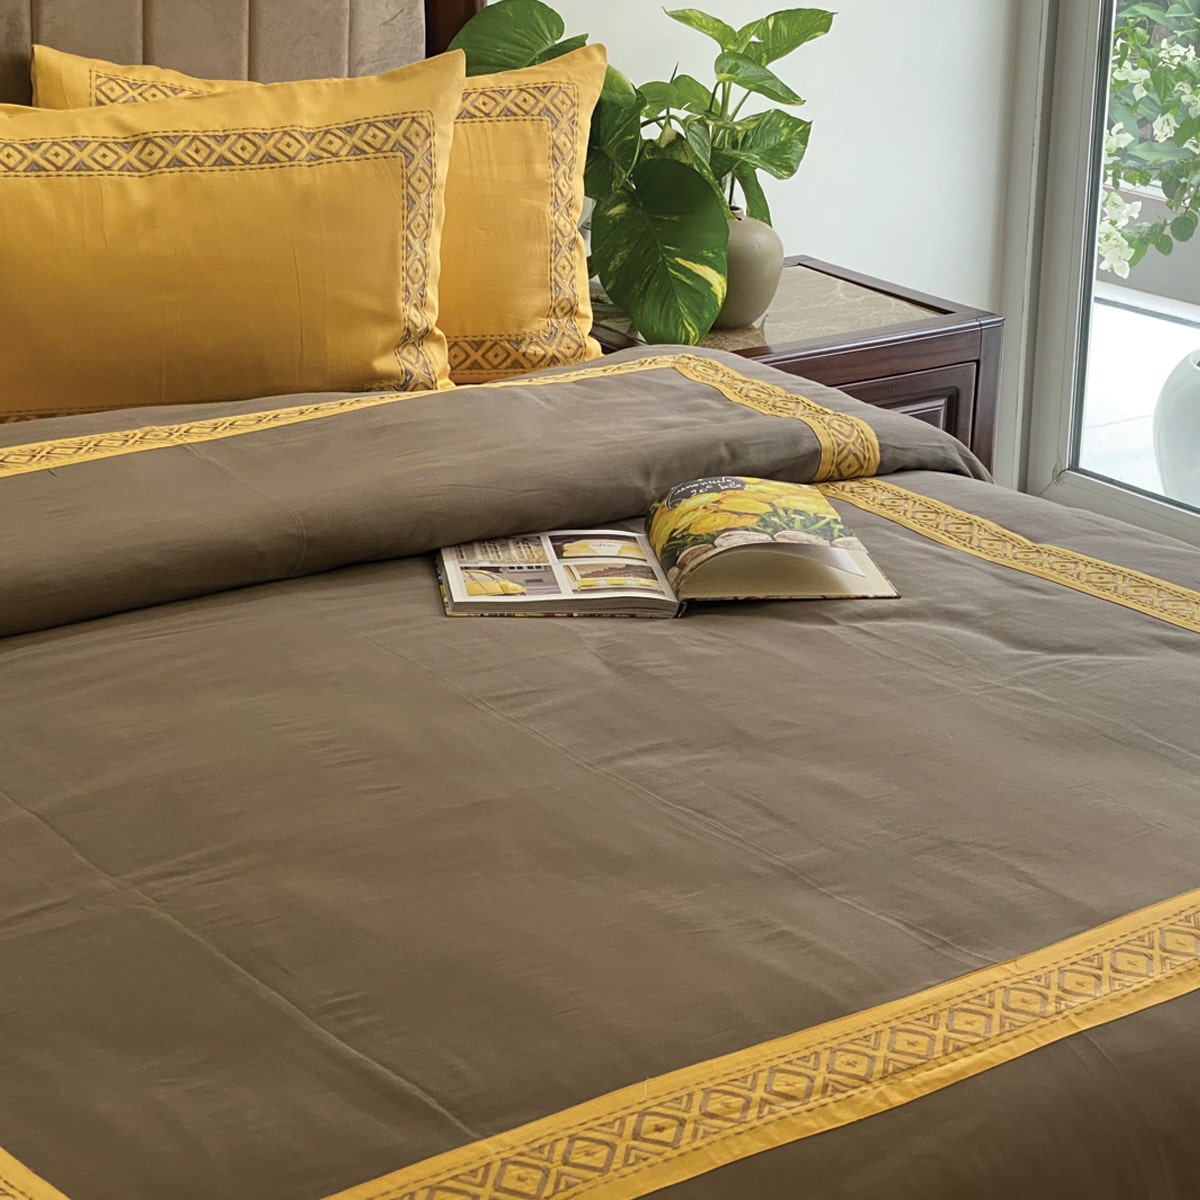 Prism Butter Cup Yellow and Olive Grey Dreams Duvet Cover Set